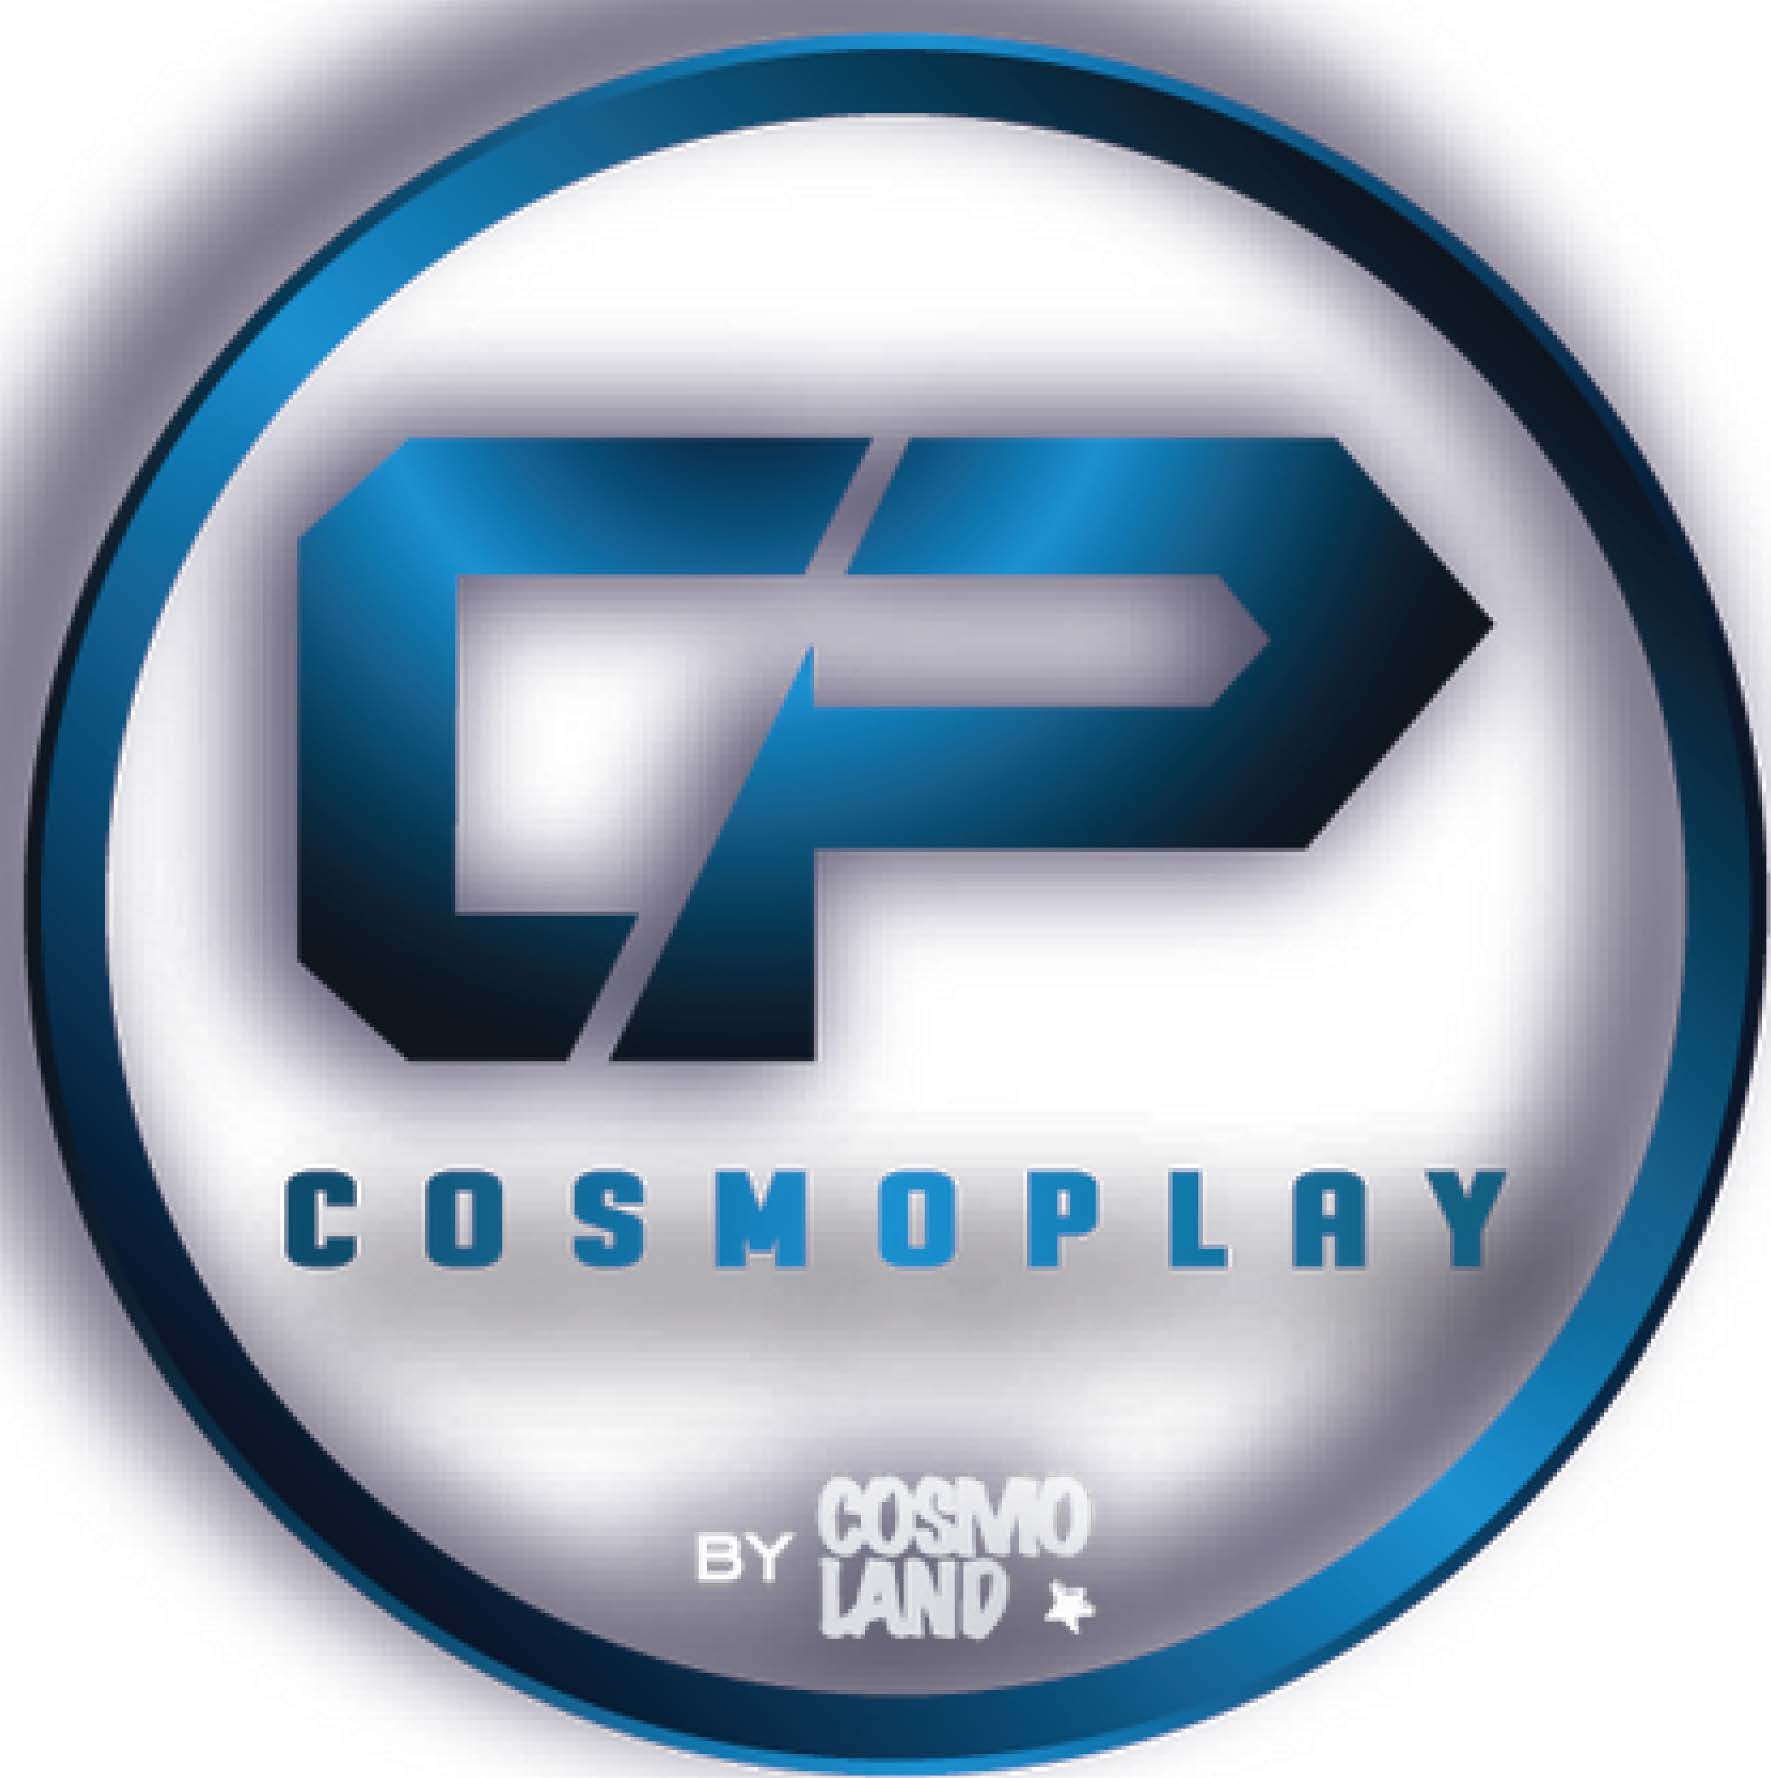 cosmo play